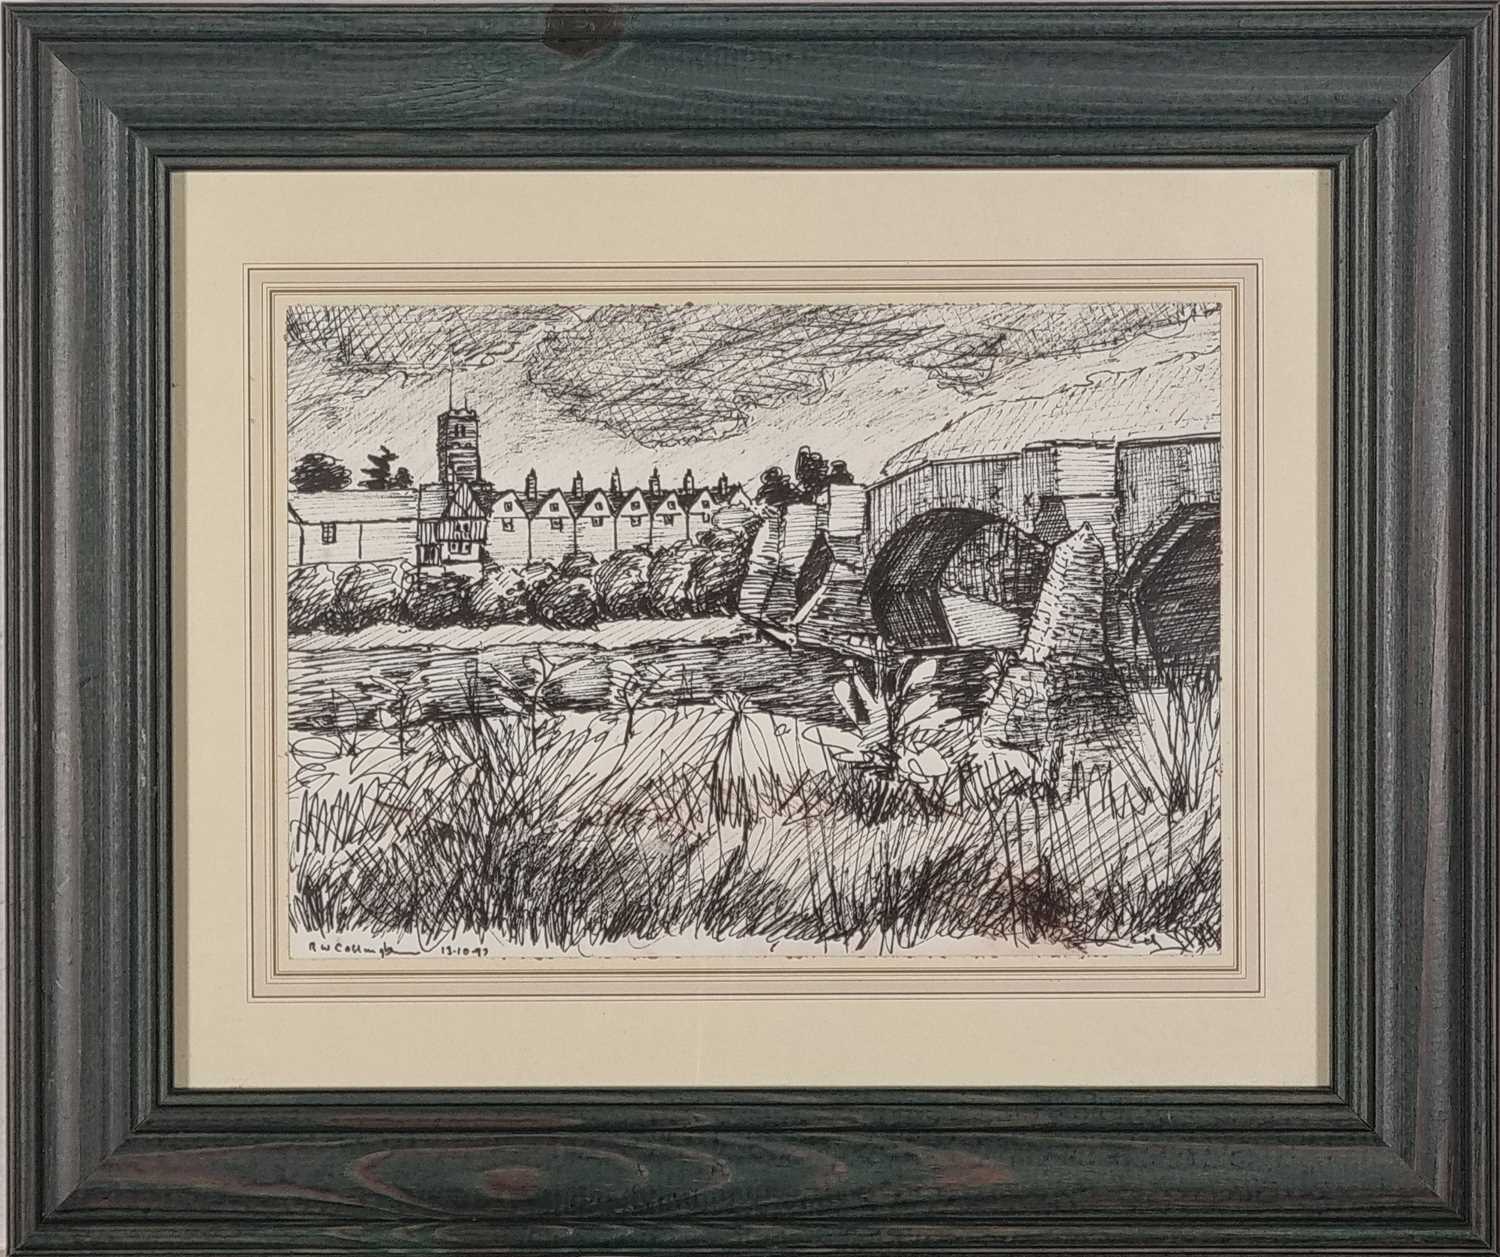 ƚ R W COLLINGHAM (British 20th Century) A Bridge over the River, Ink drawing, Signed and dated 13. - Image 2 of 3